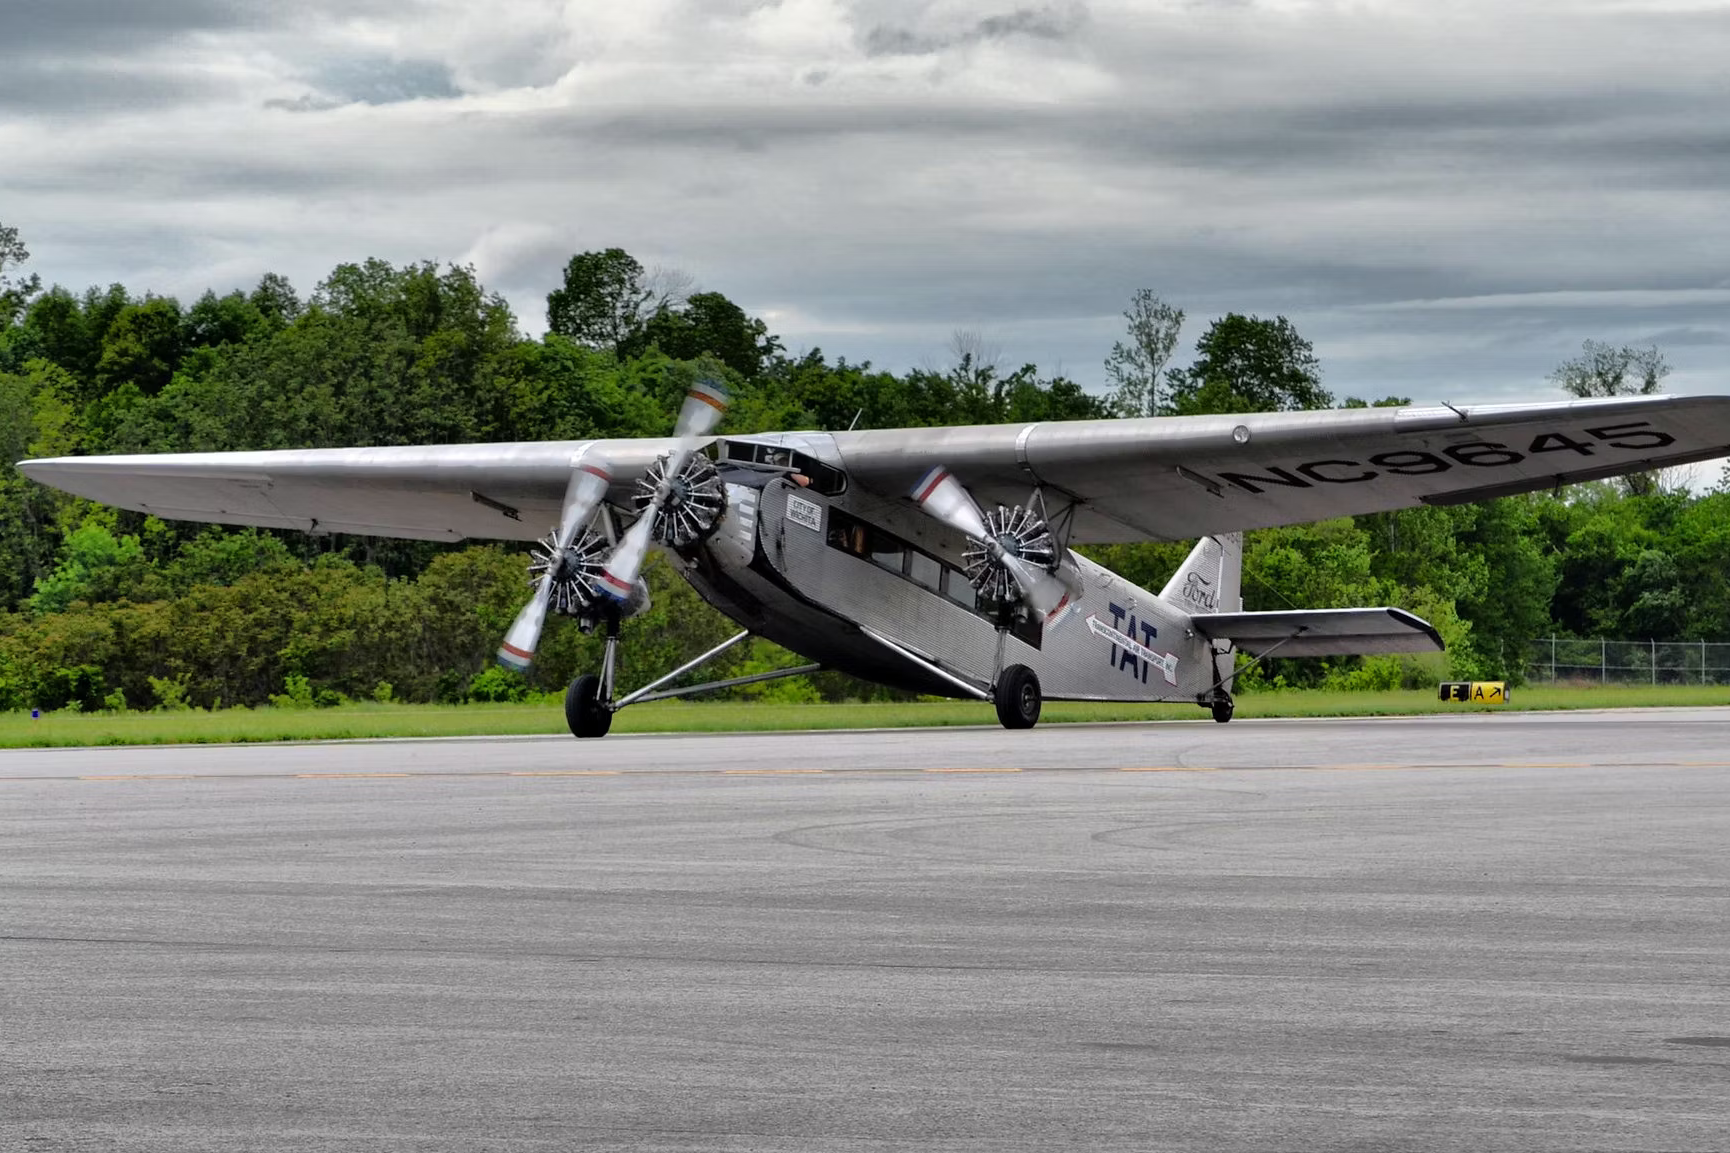 A Ford Trimotor on an airport apron.